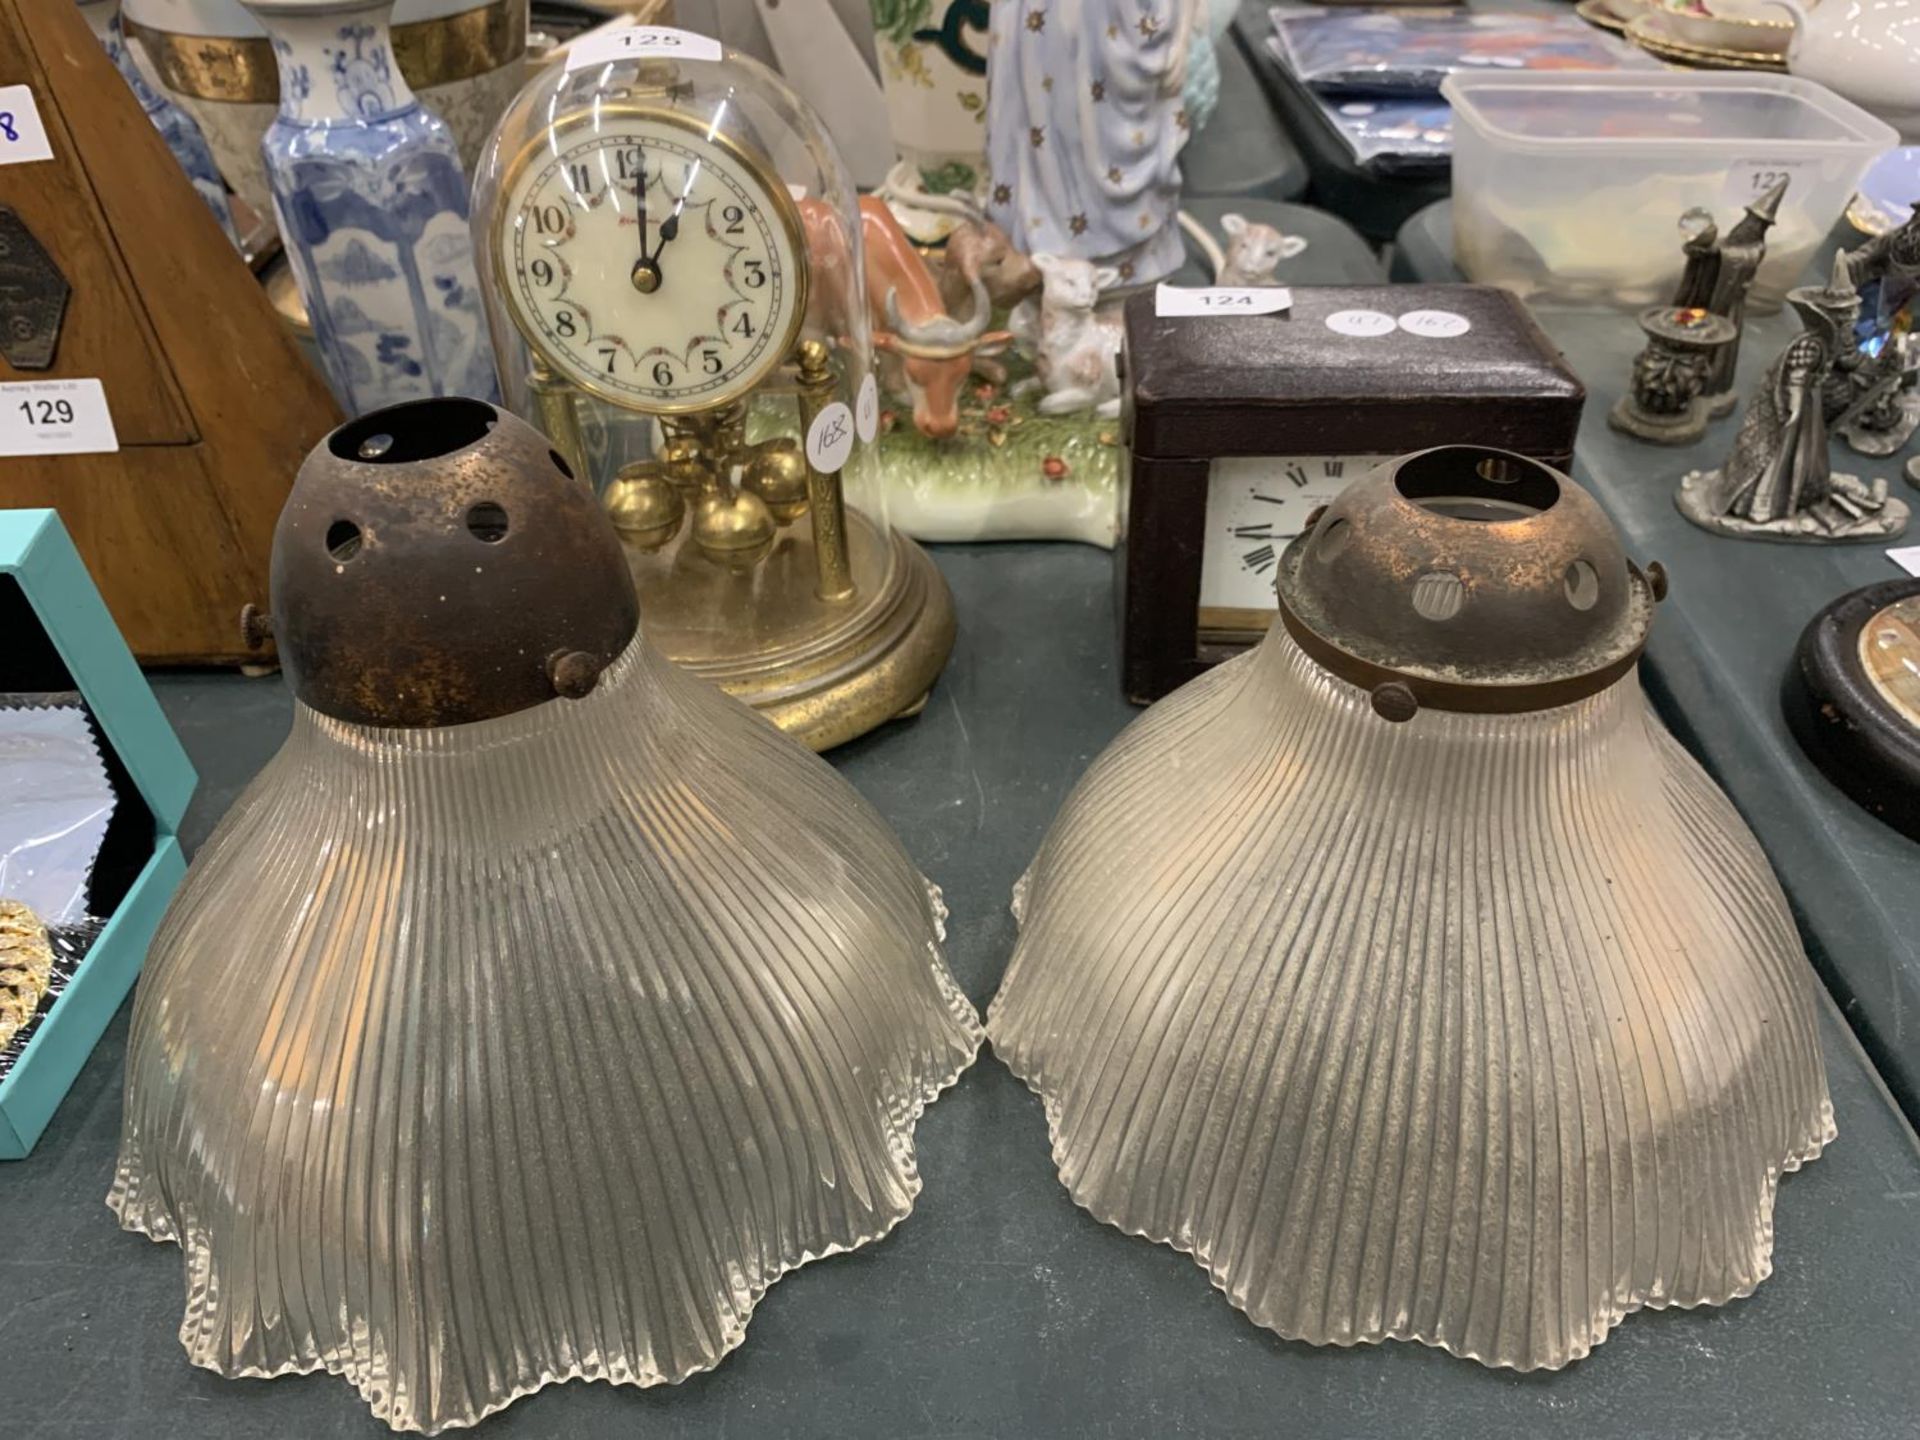 TWO VINTAGE GLASS LIGHT SHADES WITH METAL FITTINGS